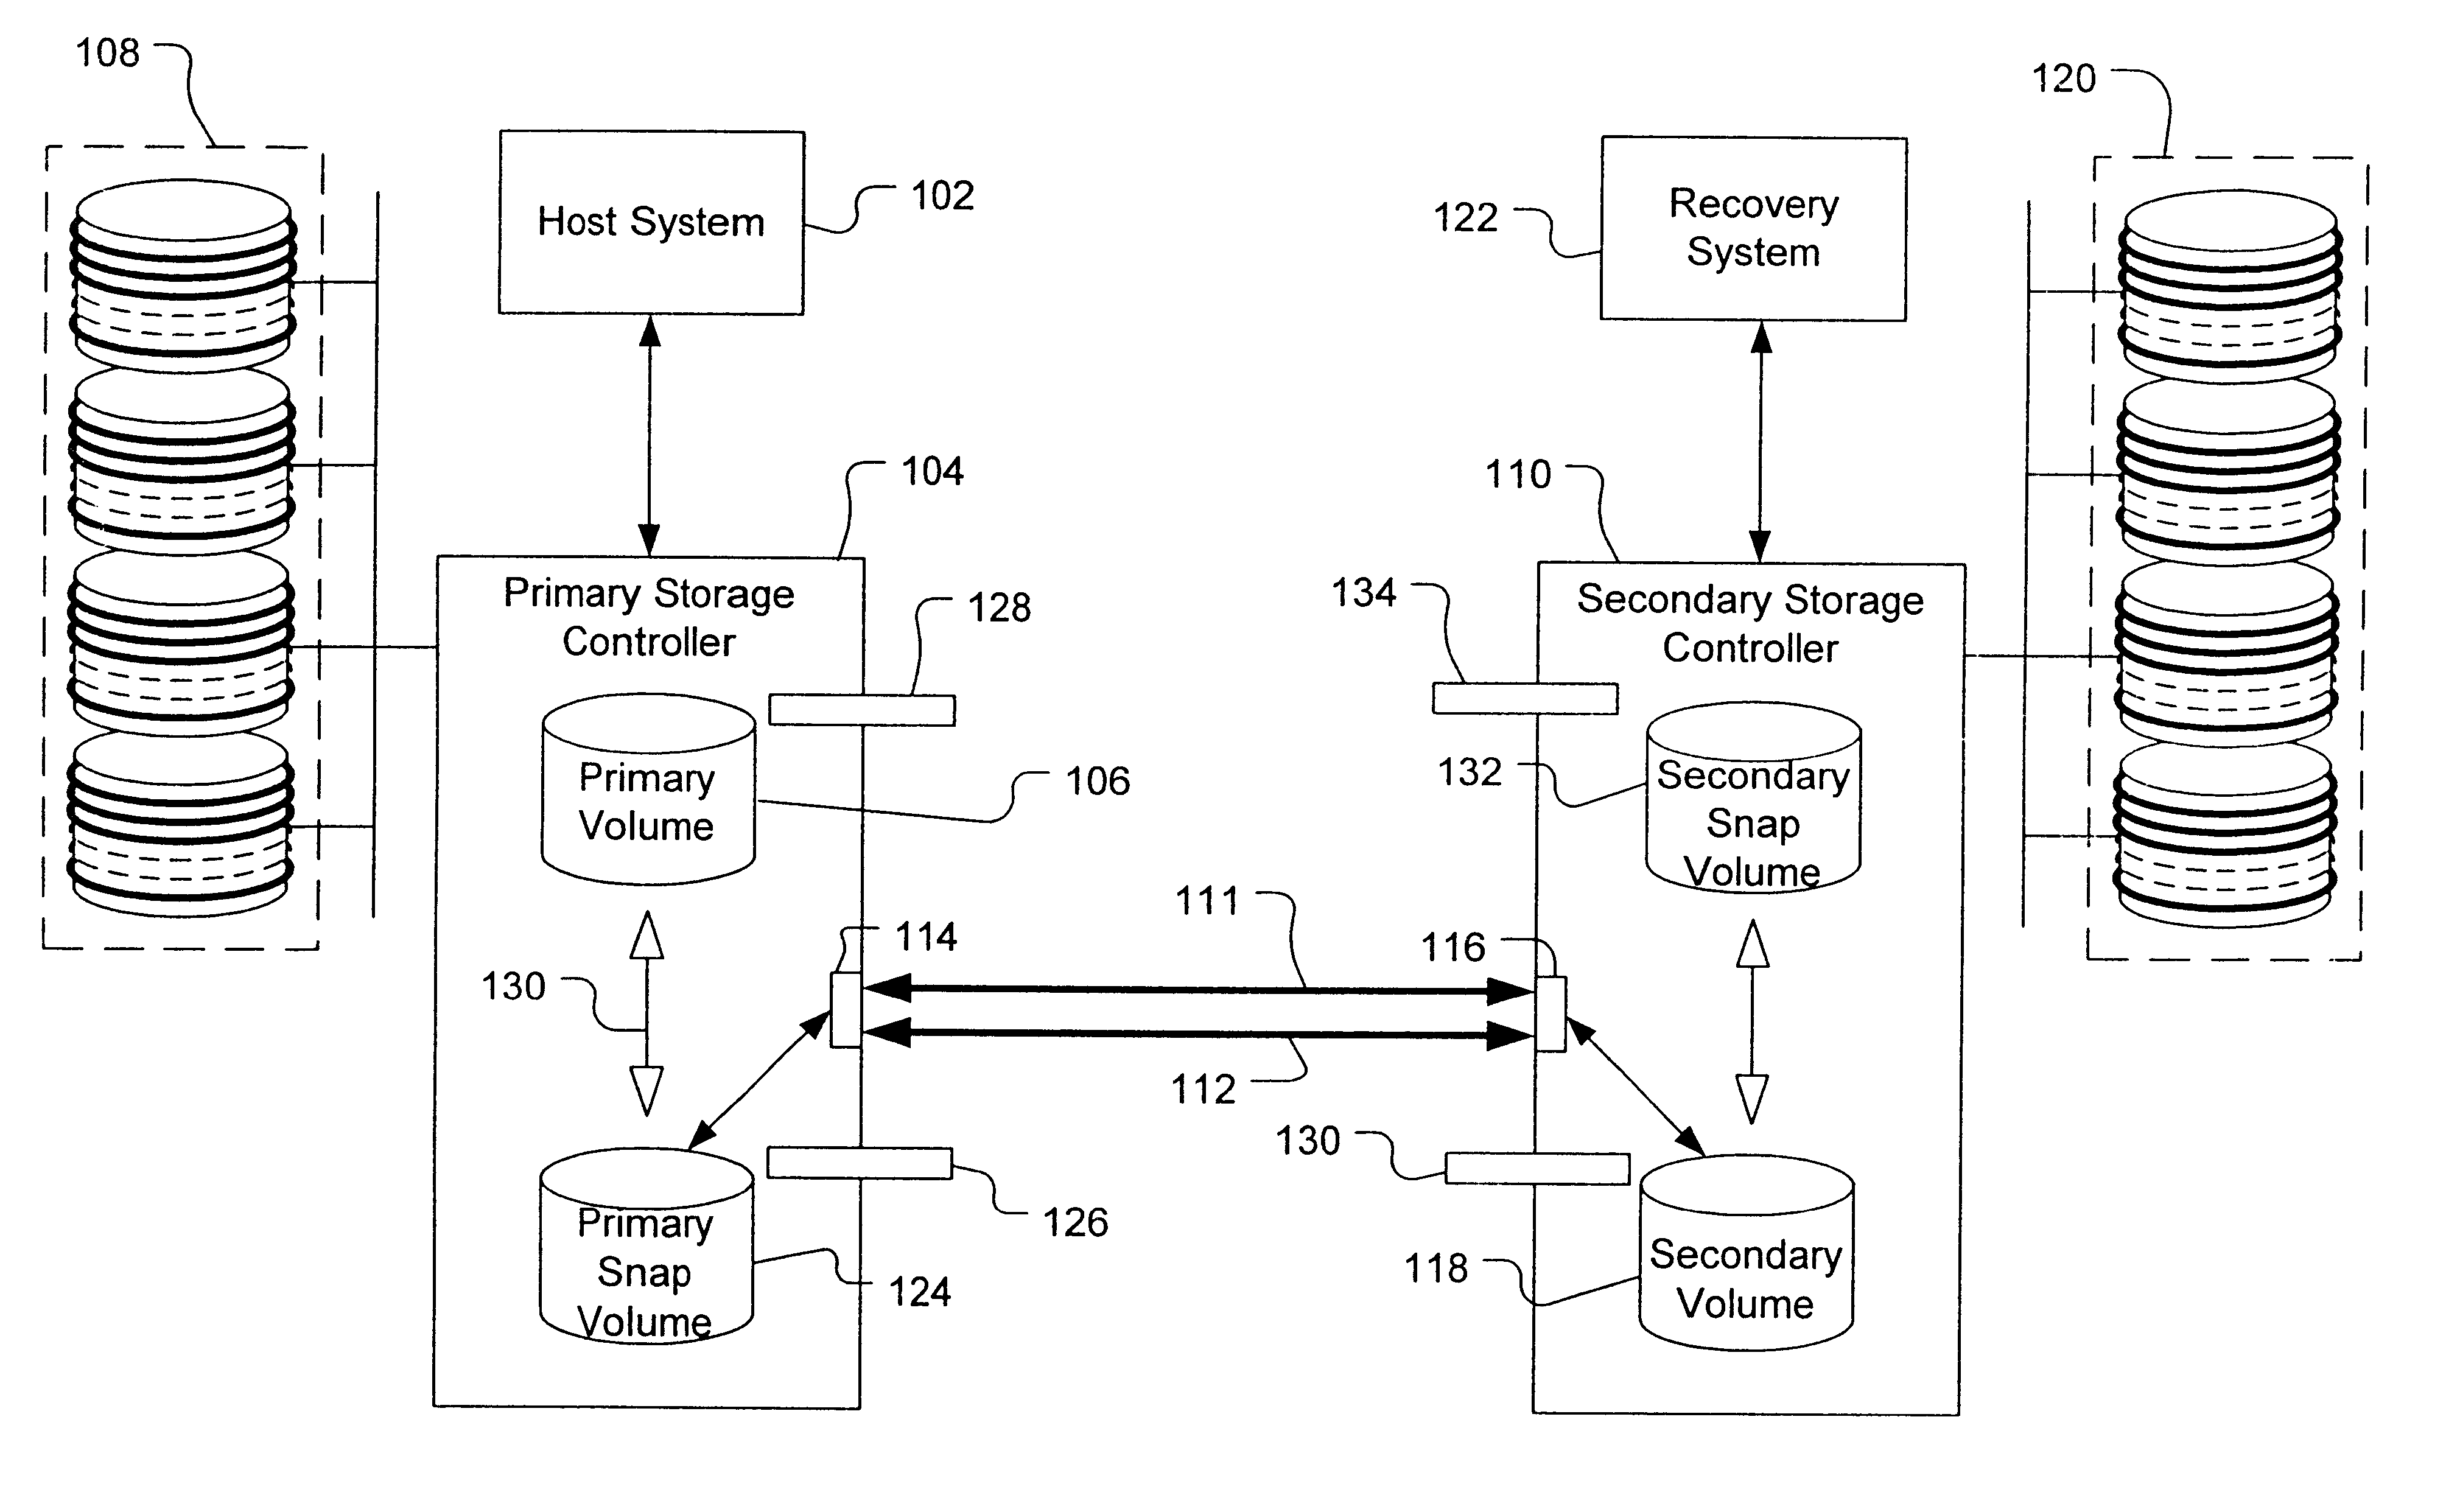 System and method for restoring data from secondary volume to primary volume in a data storage system